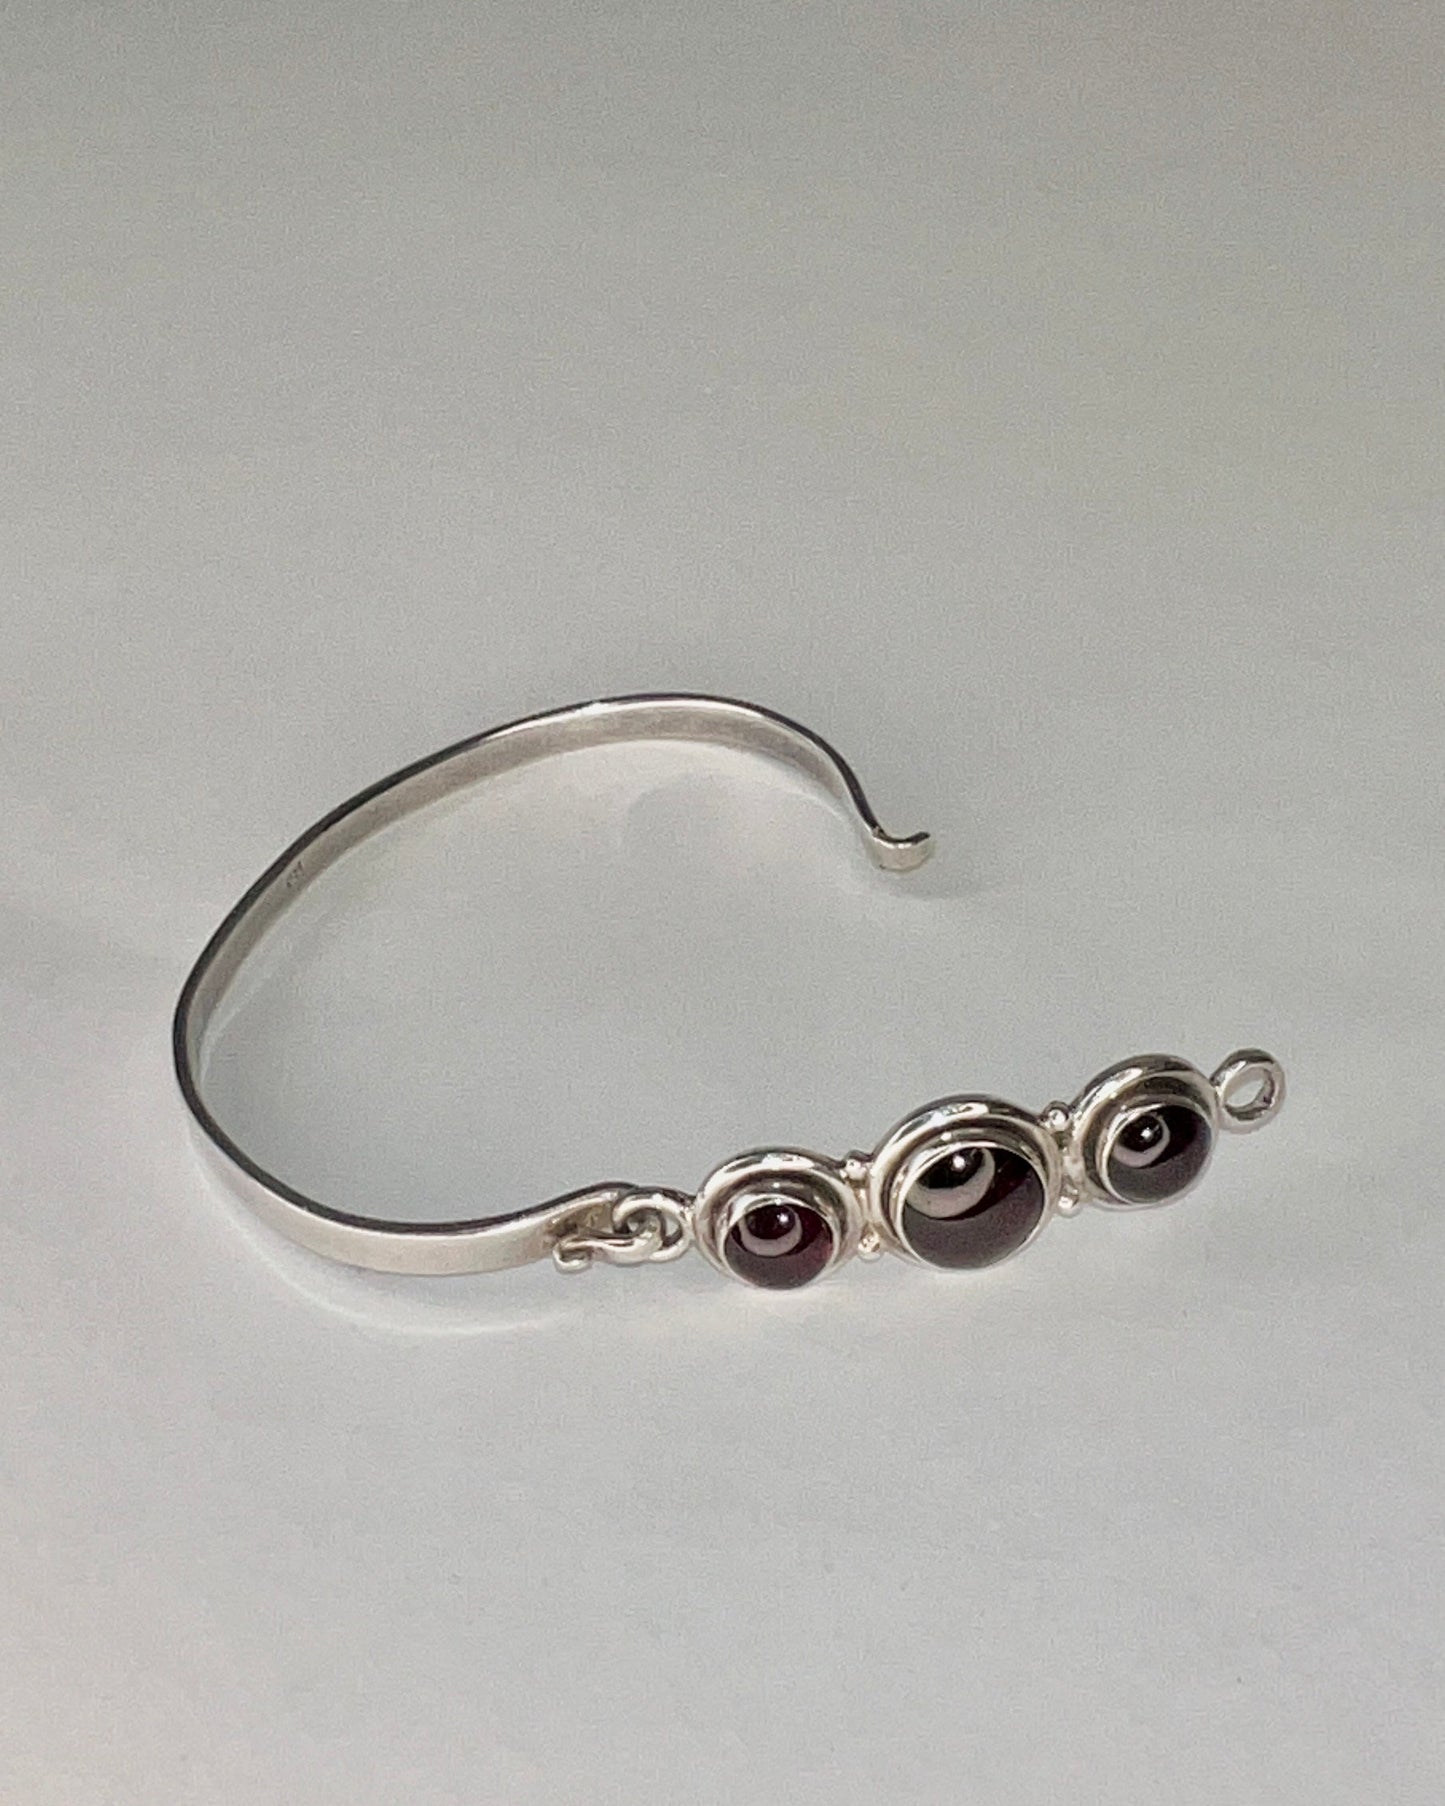 hinged silver bracelet with garnets